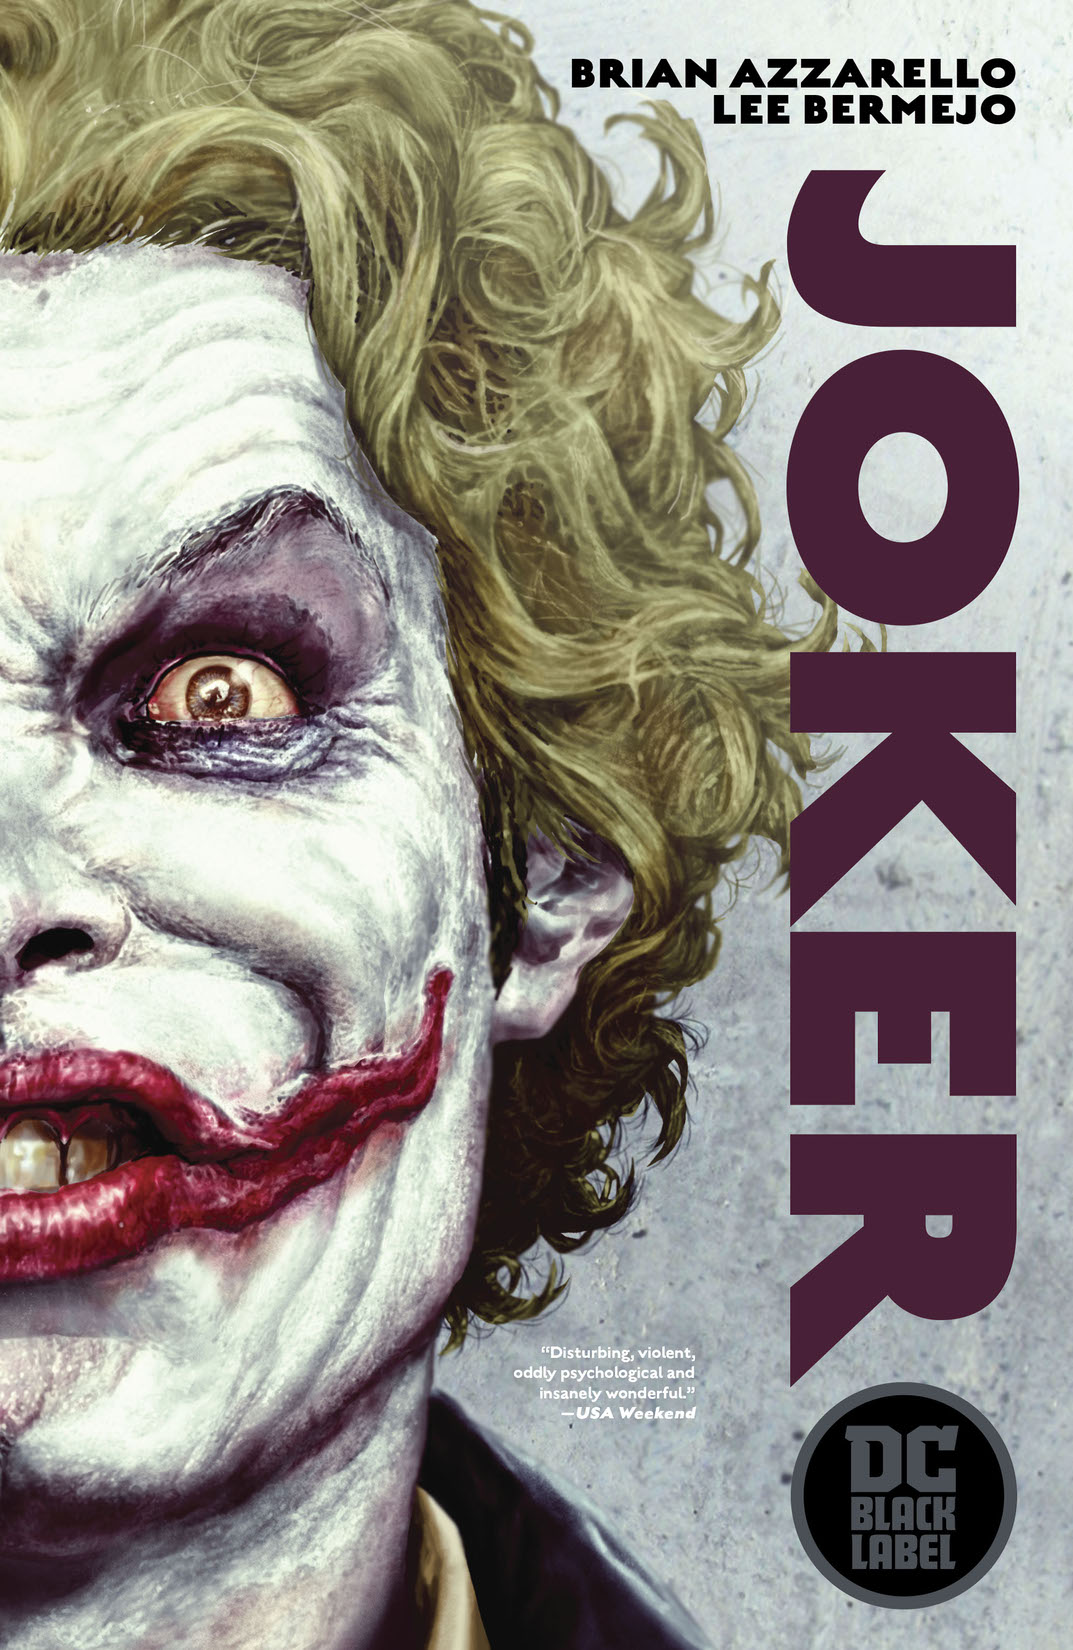 Joker: The 10th Anniversary Edition (DC Black Label Edition) preview images